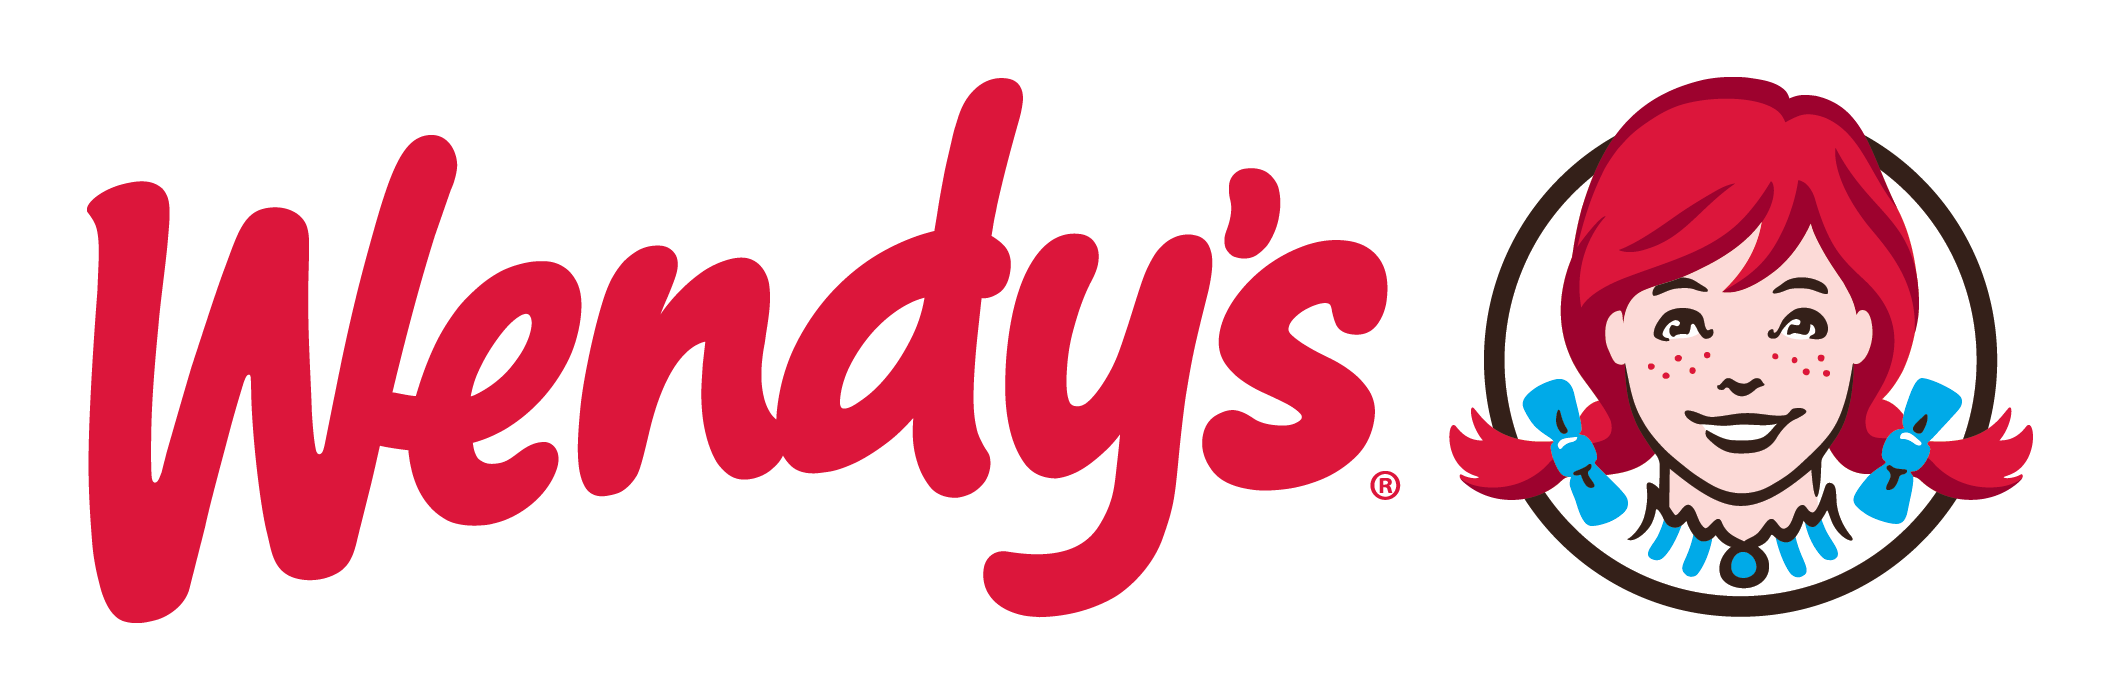 Wendy's is an American international fast food restaurant chain founded by Dave Thomas on November 15, 1969, in Columbus, Ohio. Its headquarters moved to Dublin, Ohio, on January 29, 2006.